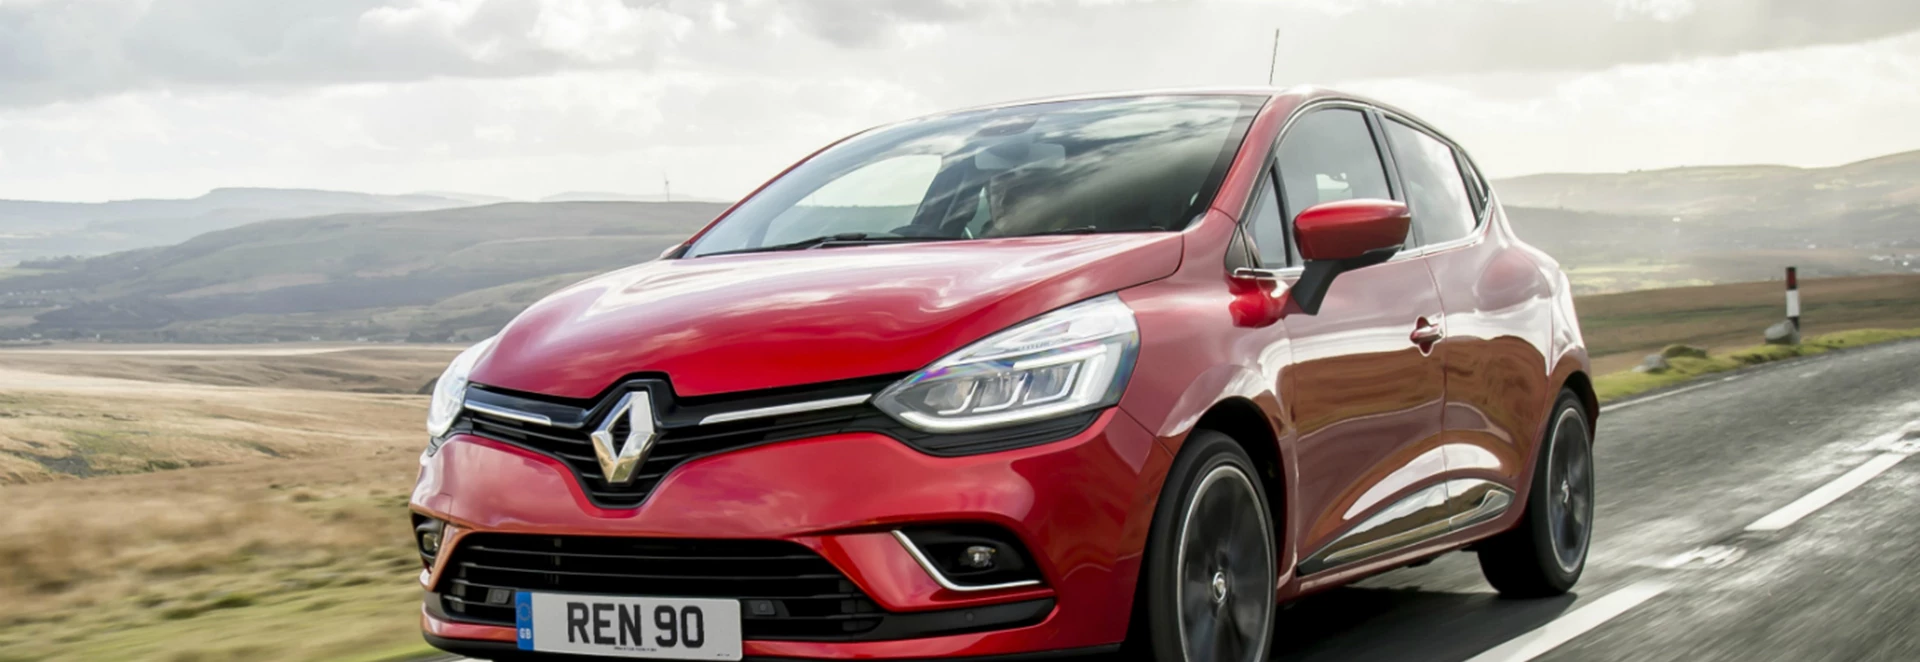 Facelifted Renault Clio arriving in October